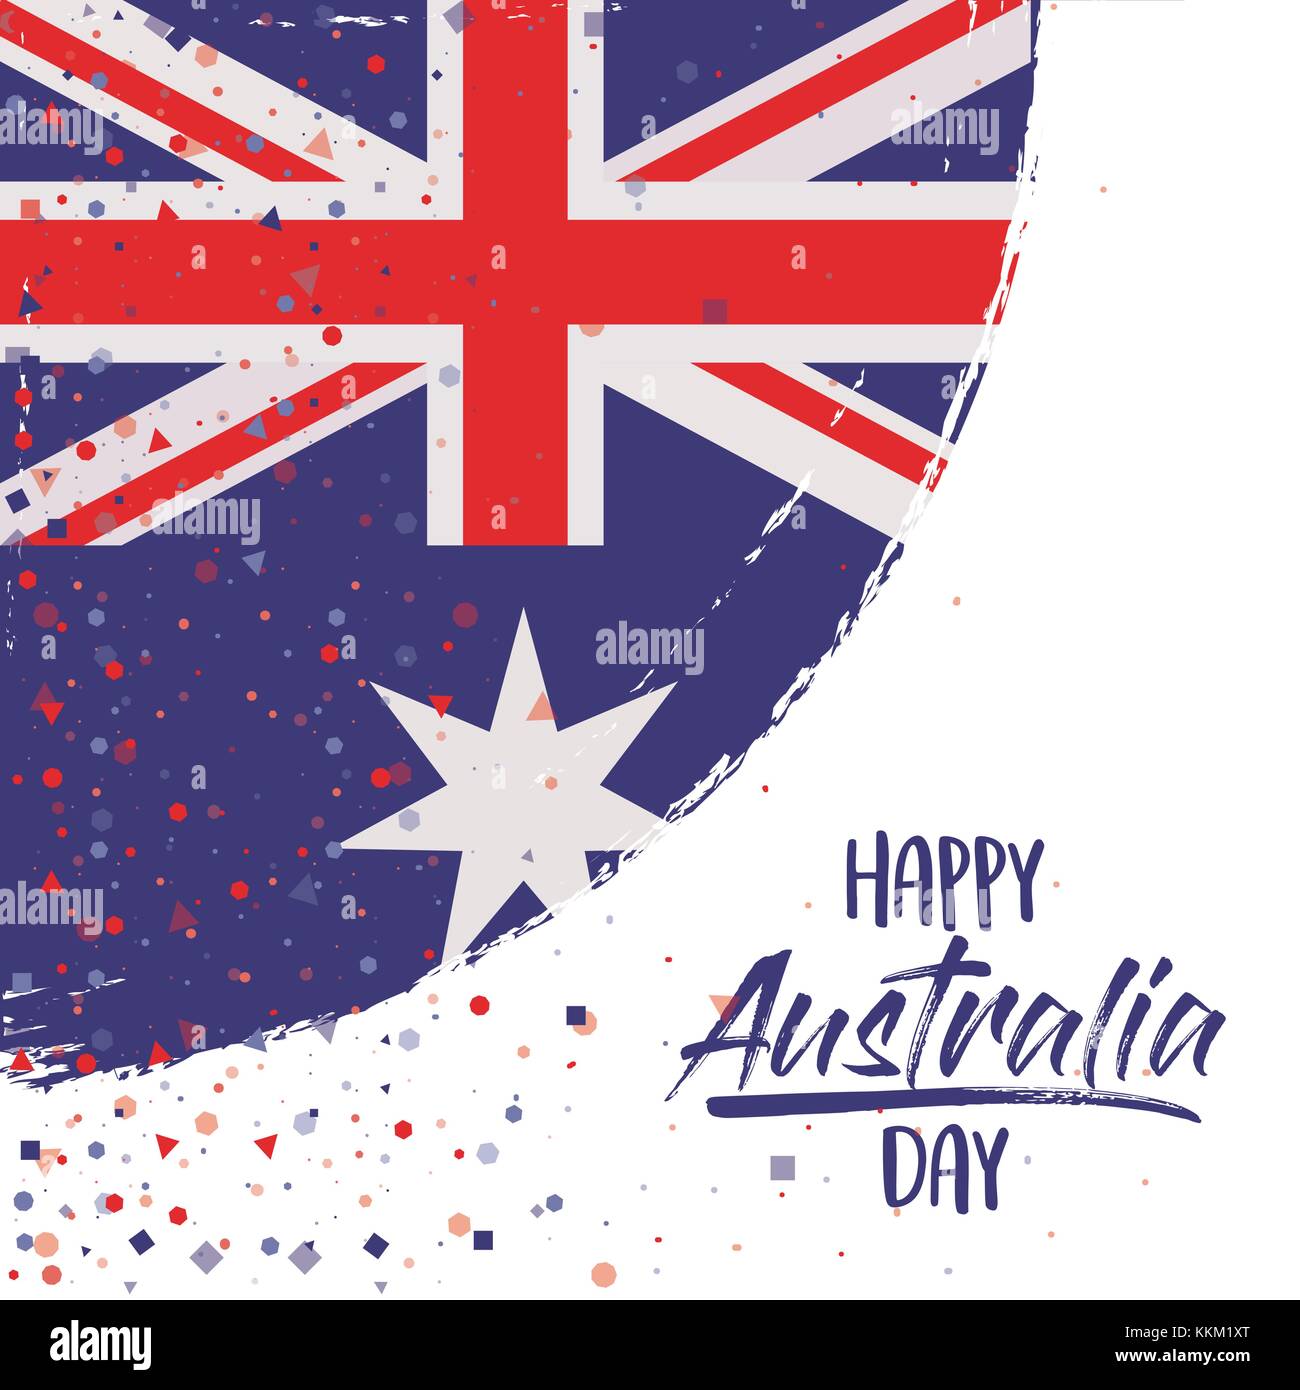 happy australia day poster with australian flag rounded brush strokes